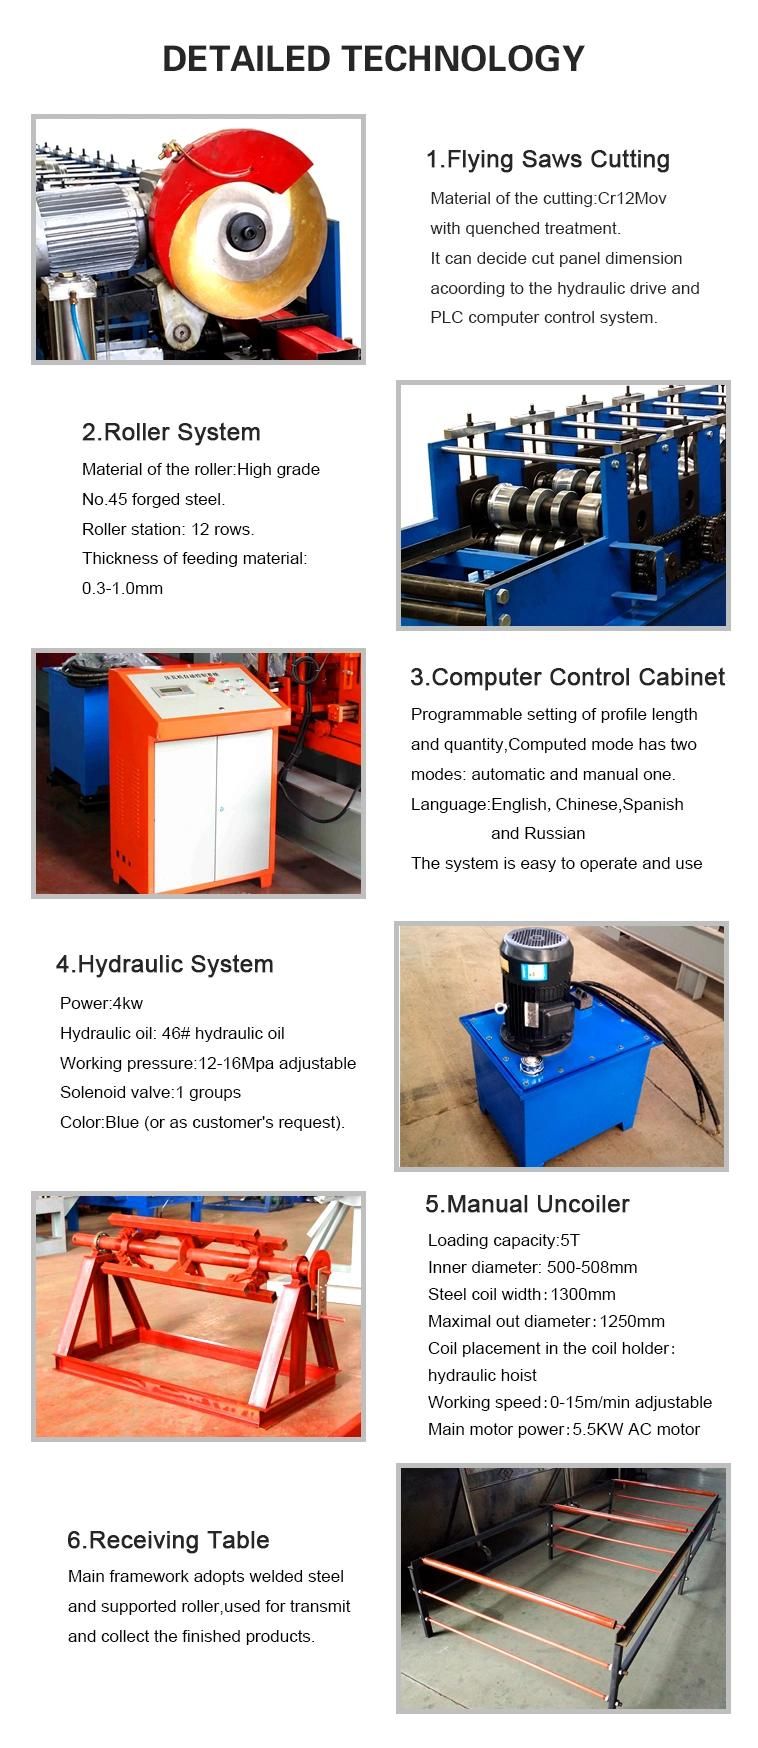 Steel Tube Rainspout Roof Tile Making Downspout Roll Forming Machine